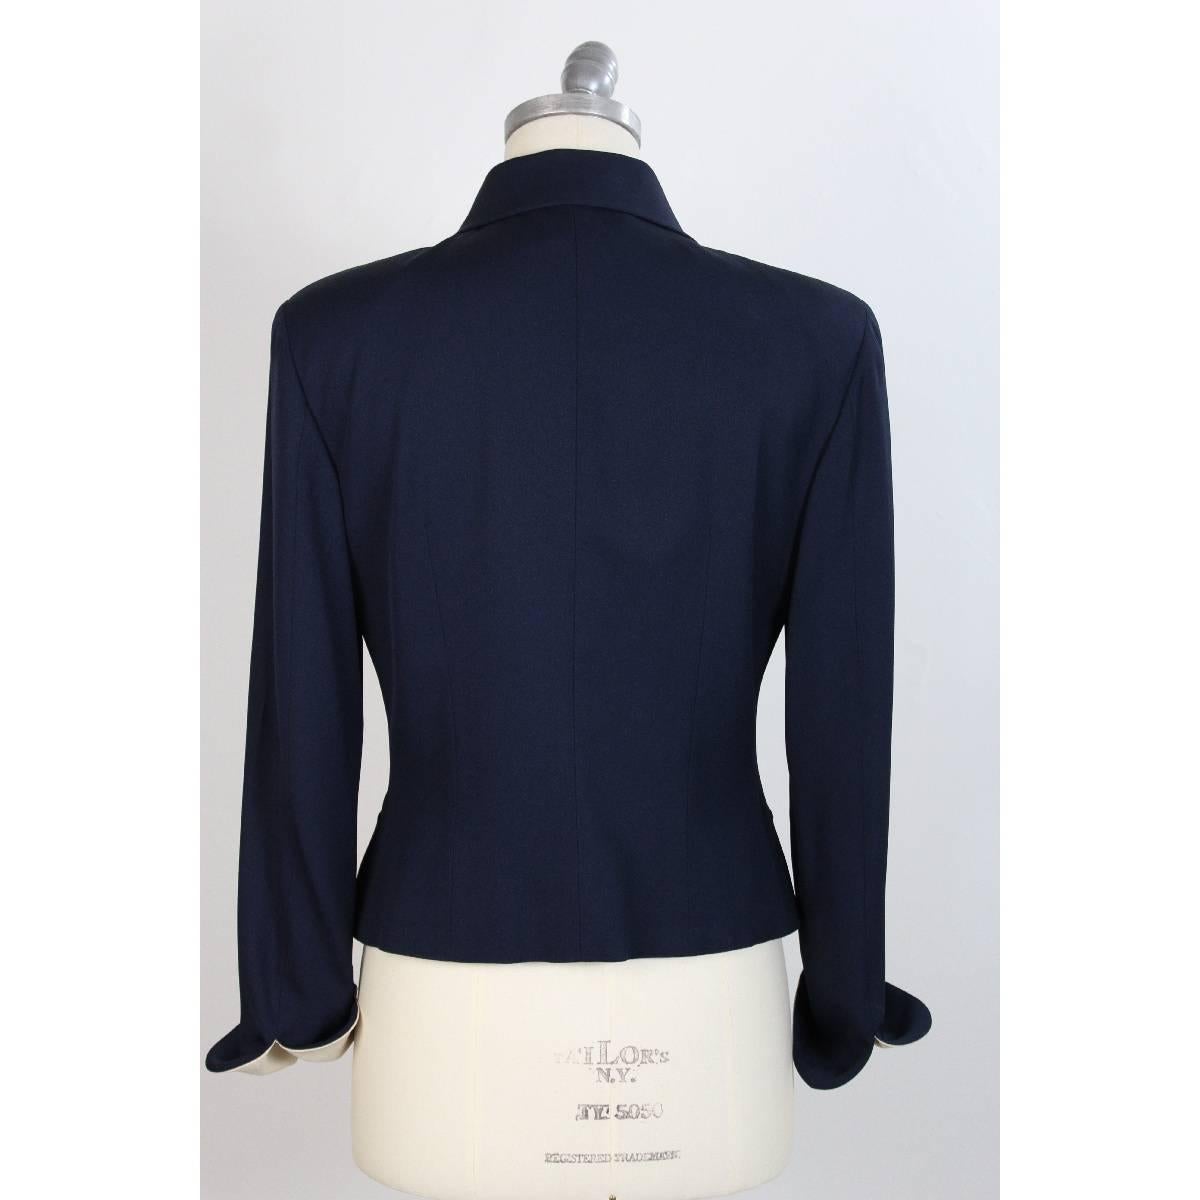 Moschino Women’s Cheap and Chic Jacket. Blue color, slim fit, giacca chiusura bottoni beige, primo bottone ha un morbido fiocco color beige. Made in italy 1990s. Excellent vintage conditions

Size: 44 It 10 Us 12 Uk 

Shoulder: 44 cm
Chest / Bust: